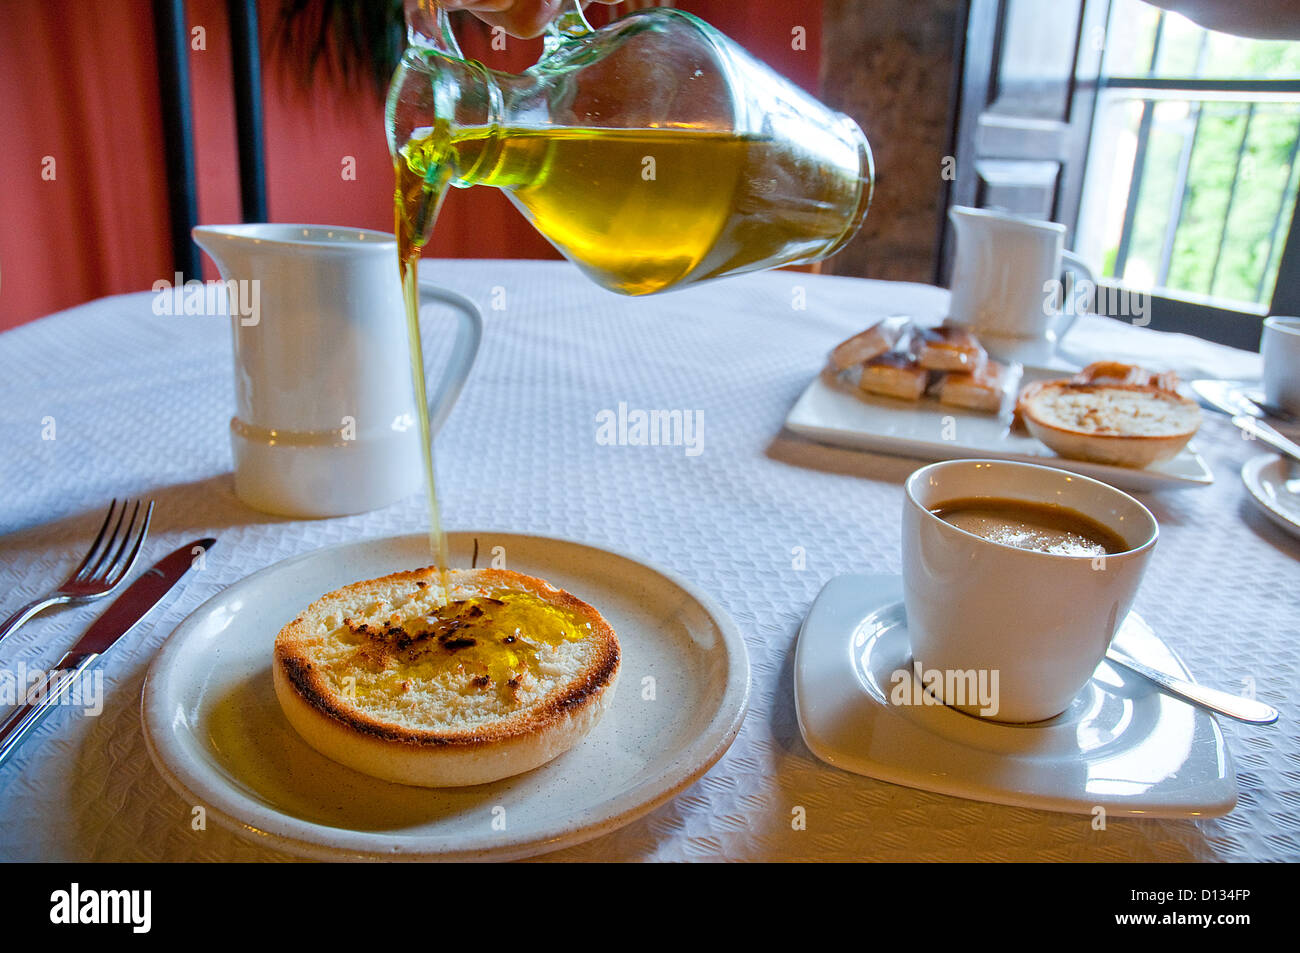 Olive oil on toast for breakfast. Spain. Stock Photo